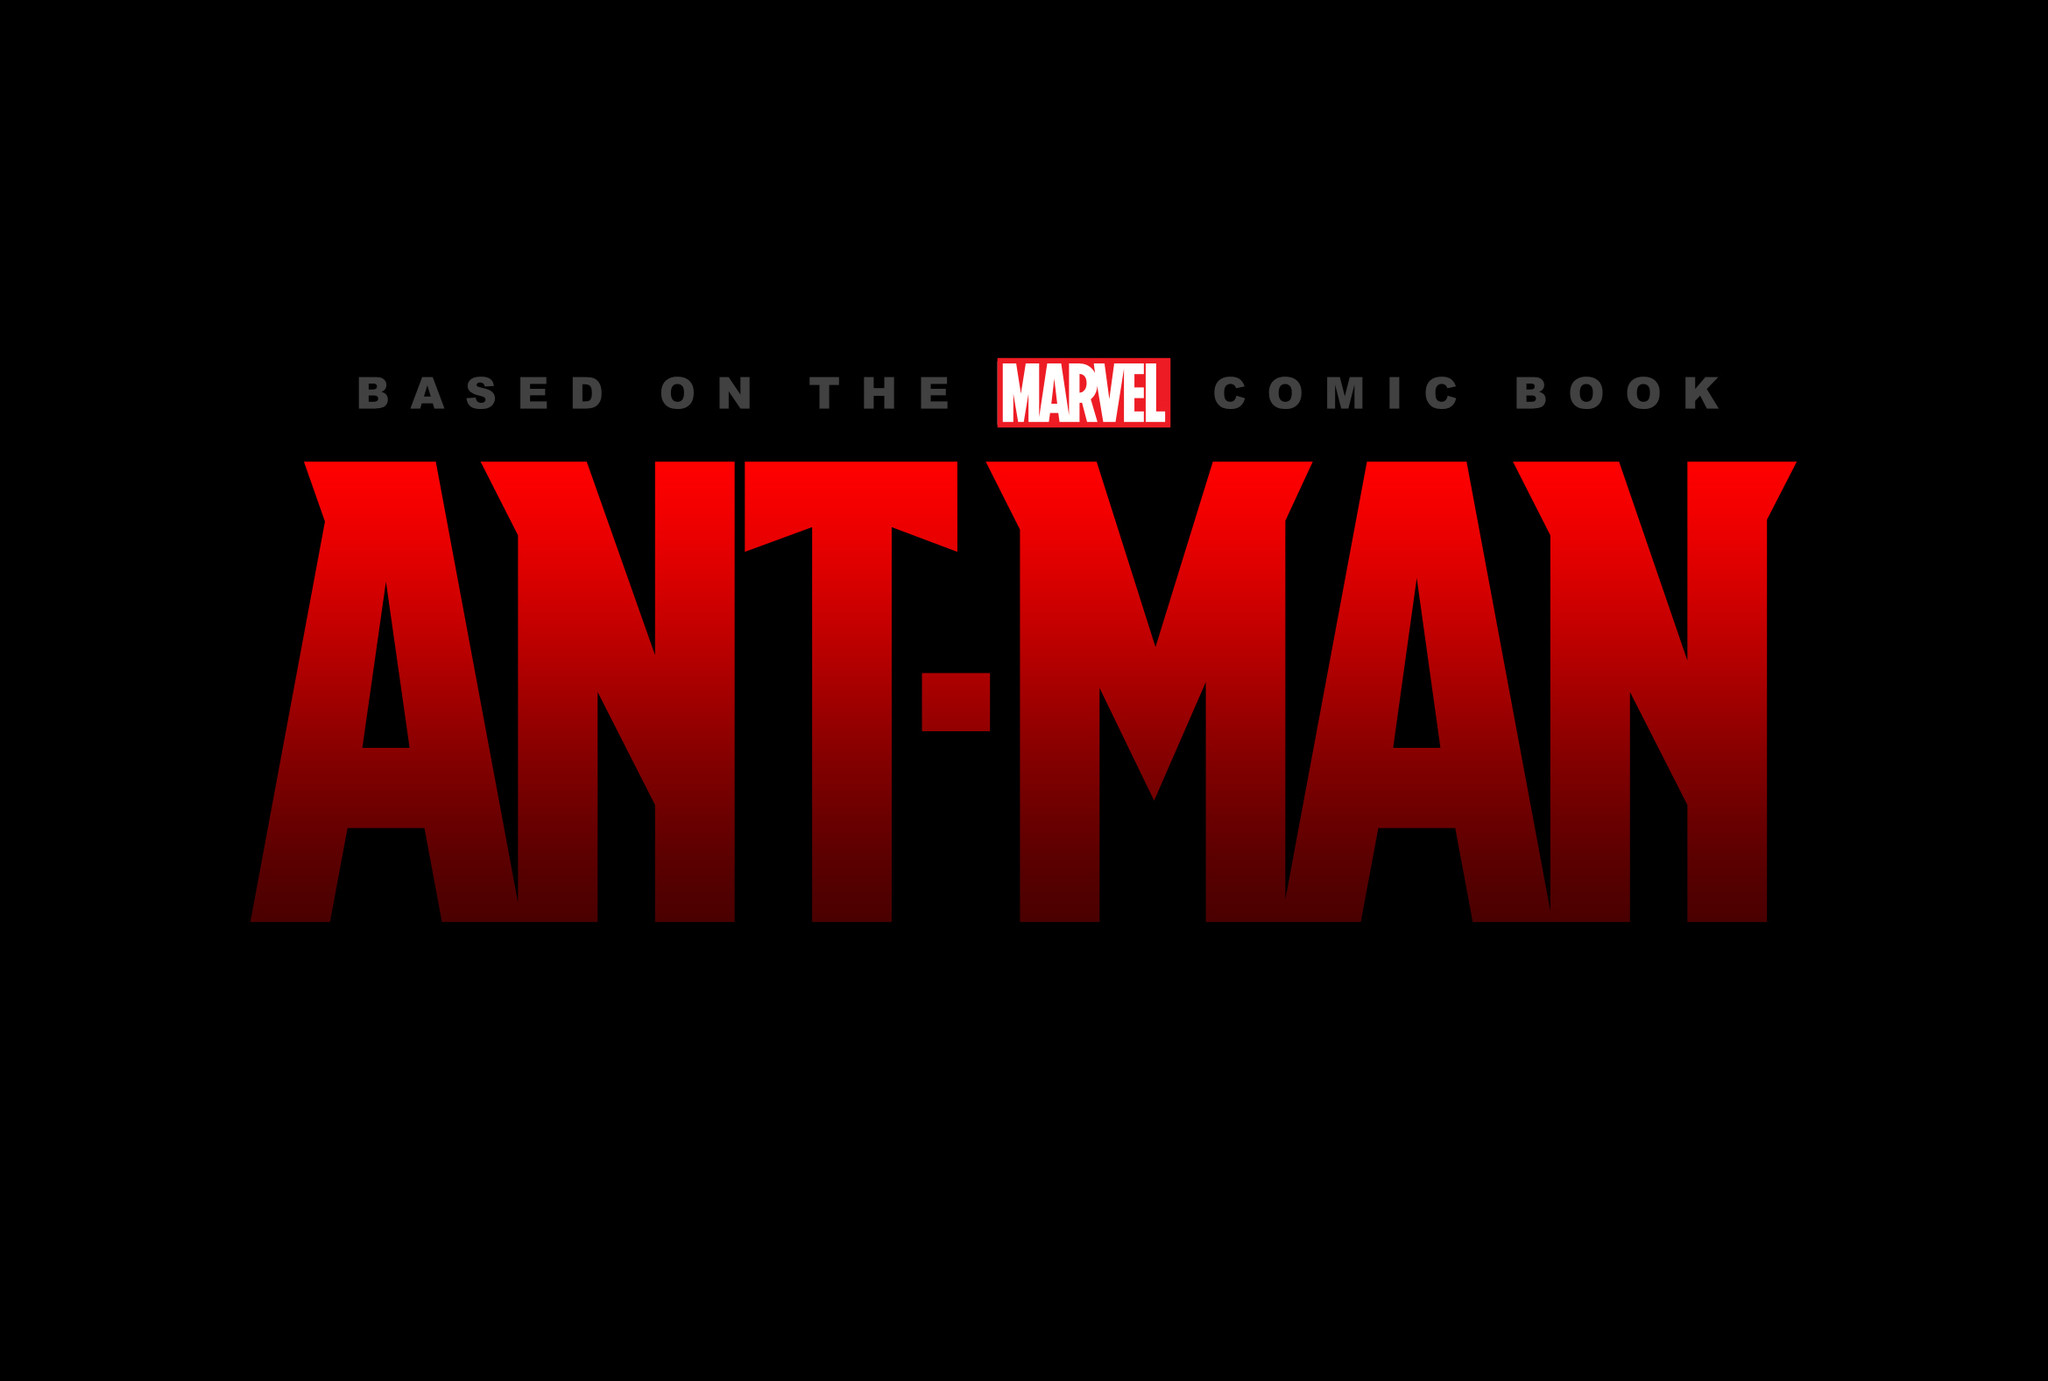 Michael Douglas Set to Star as Hank Pym in Marvel’s ‘Ant-Man’